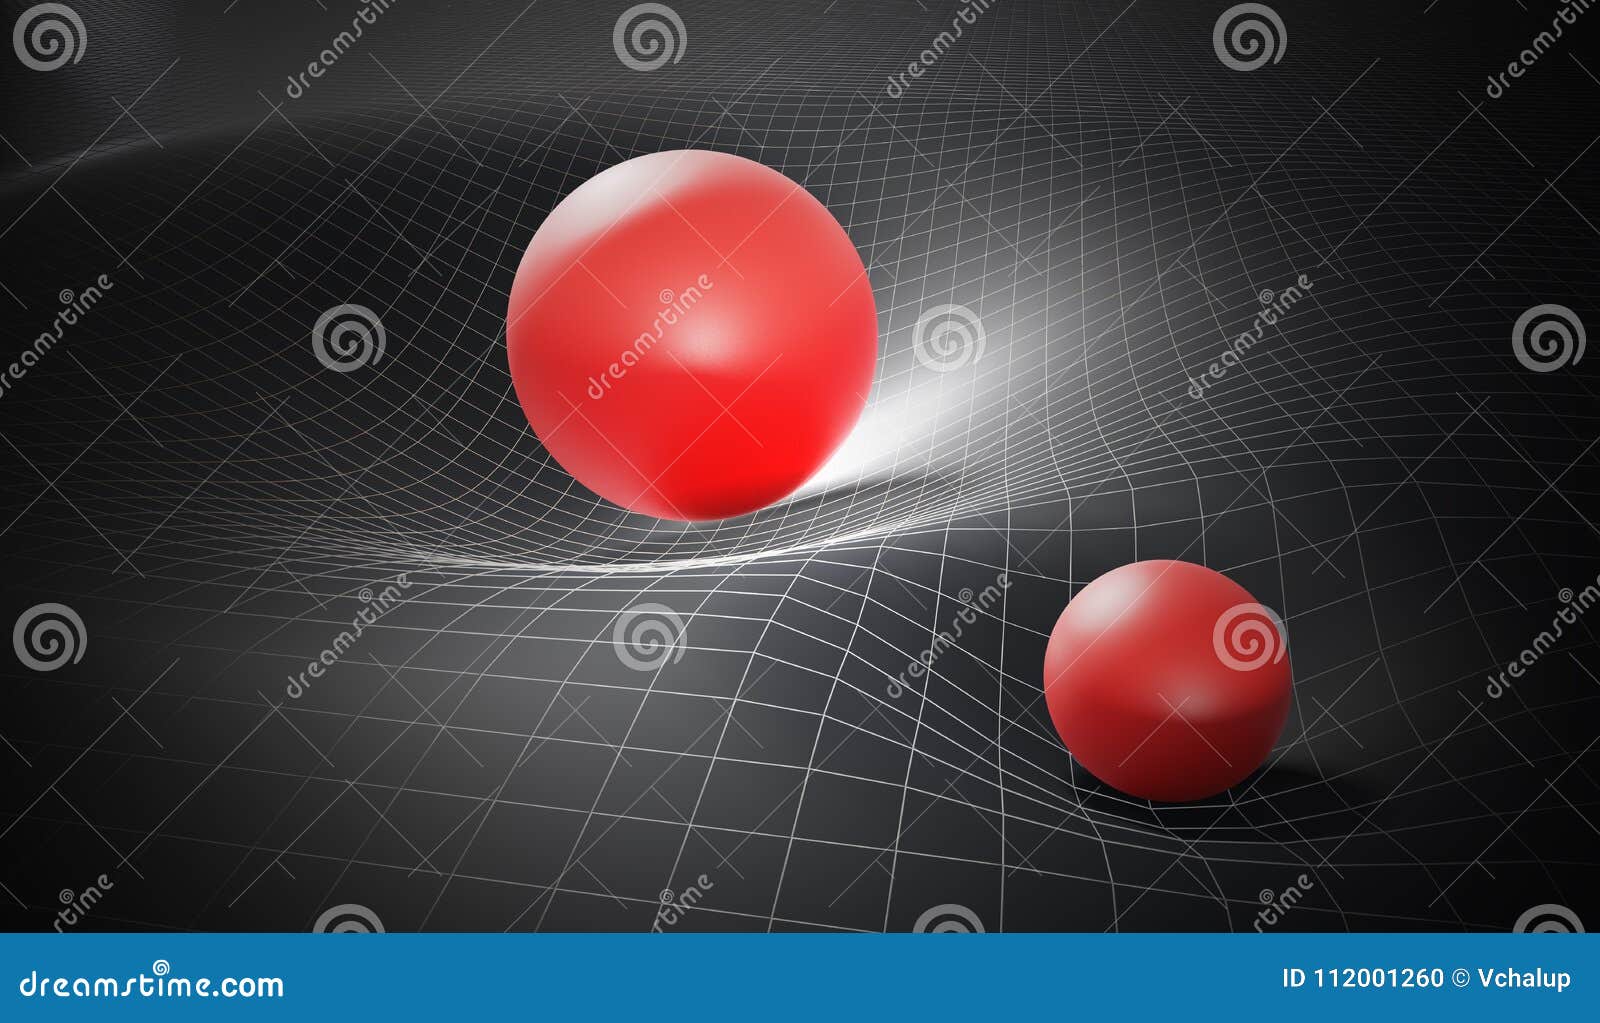 Curved Spacetime Stock Illustrations – 153 Curved Spacetime Stock  Illustrations, Vectors & Clipart - Dreamstime